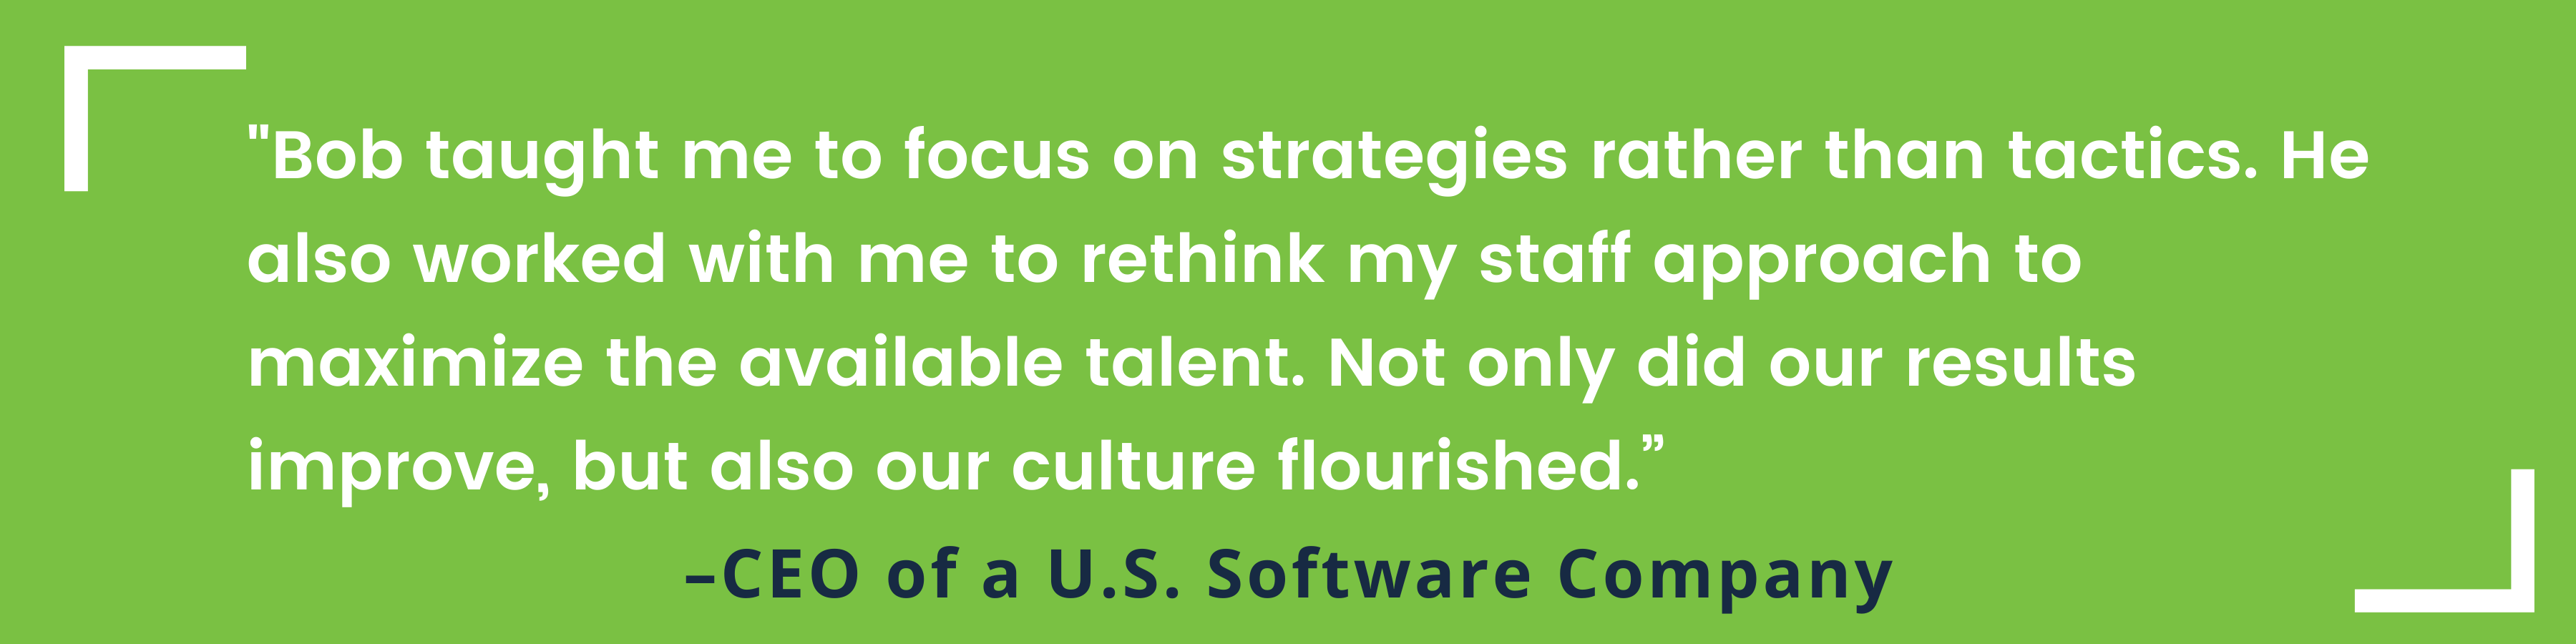 "Bob taught me to focus on strategies rather than tactics. He also worked with me to rethink my staff approach to maximize the available talent. Not only did our results improve, but also our culture flourished.” -CEO of a U.S. Software Company